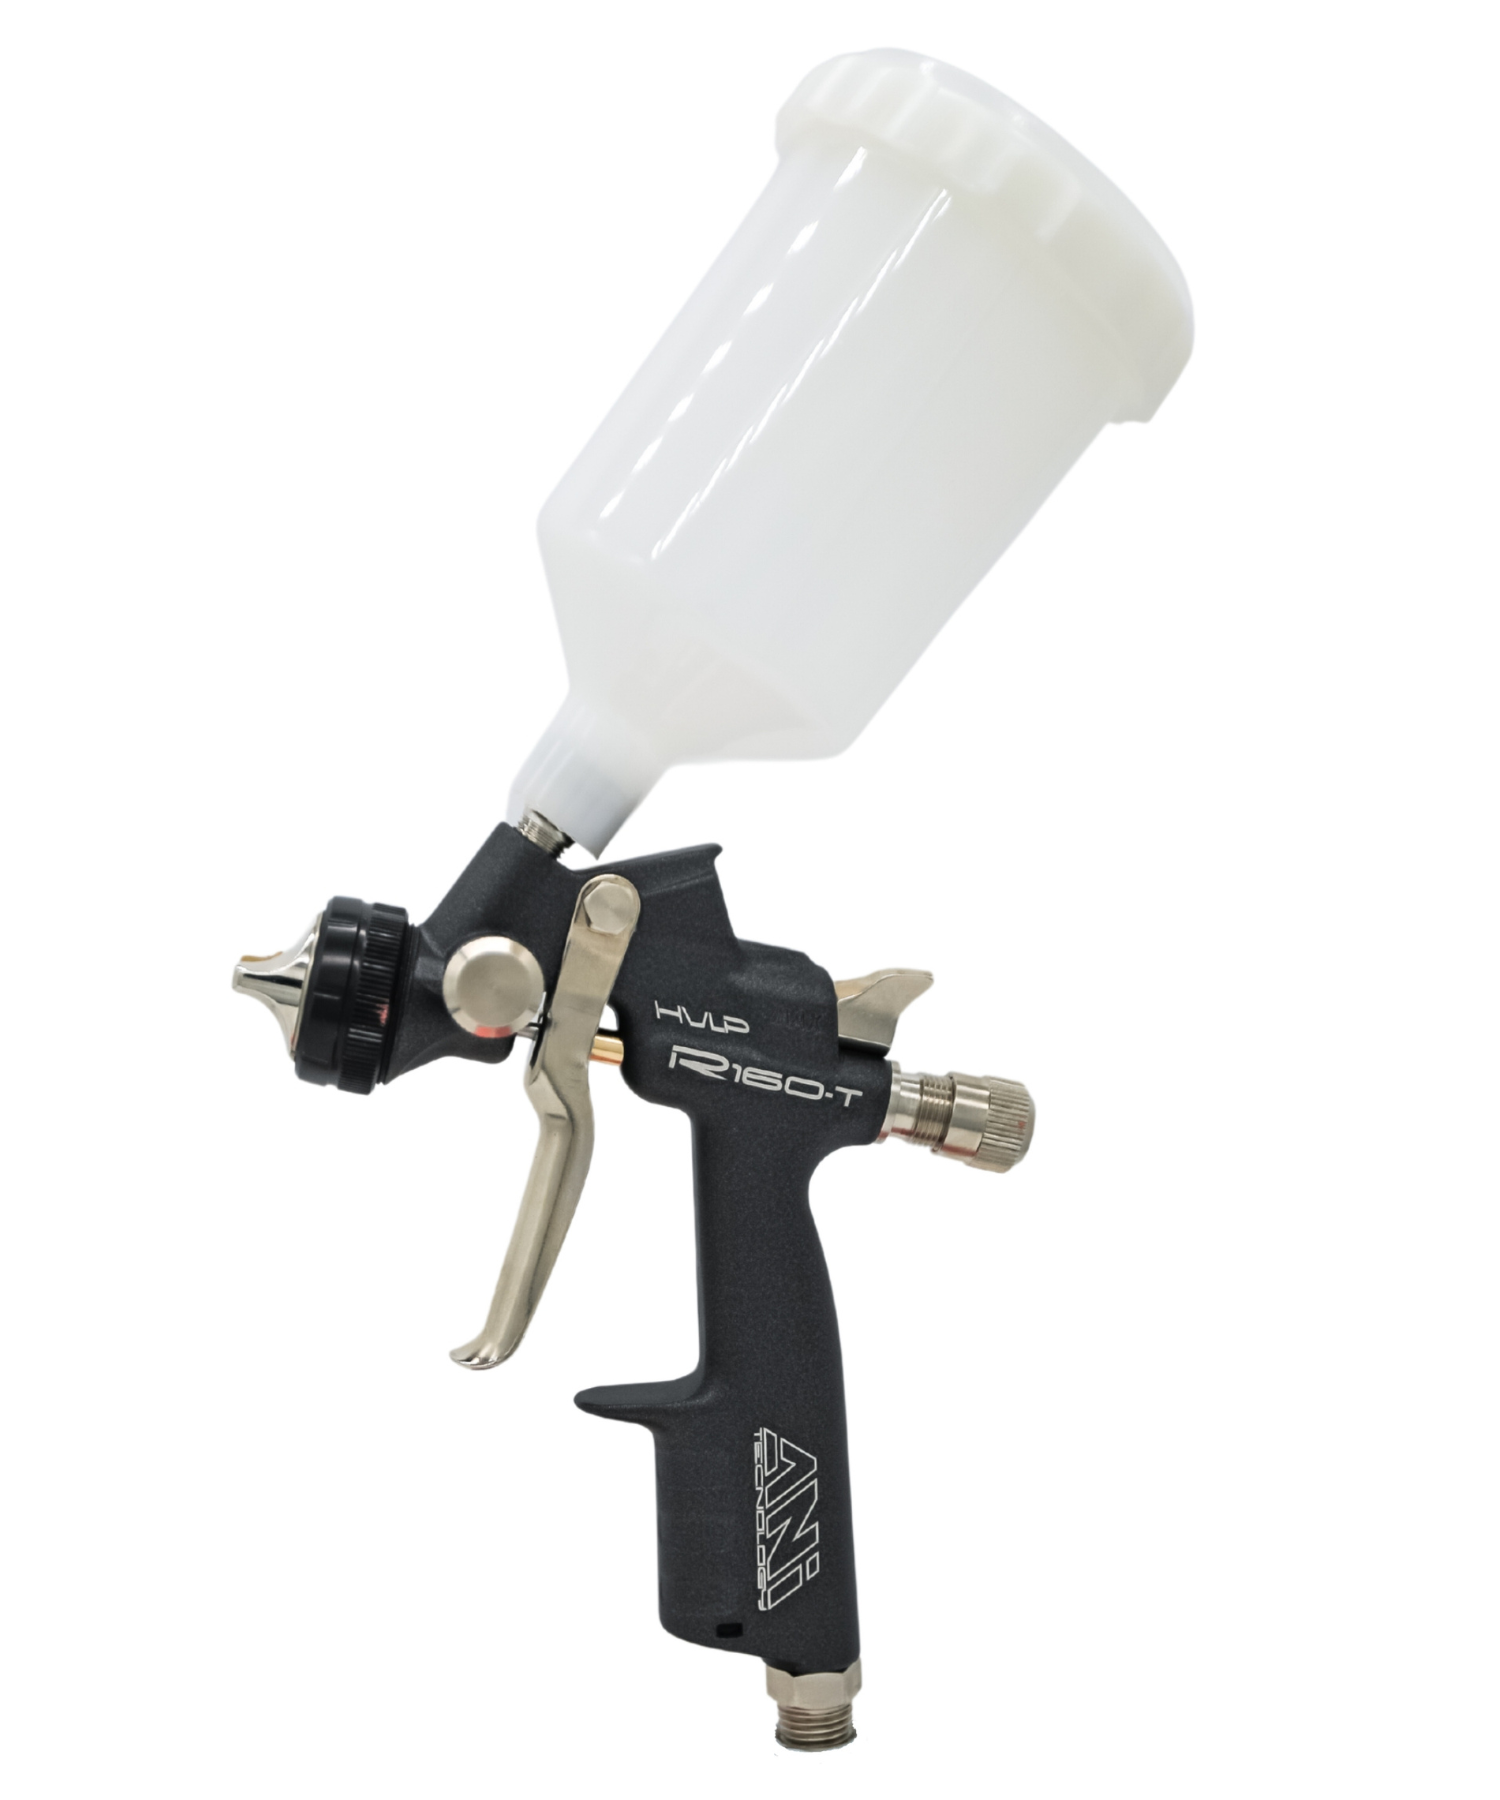 ANI R160/T- HVLP AUTOMOTIVE SPRAY GUN FOR PROFESSIONAL PAINTING